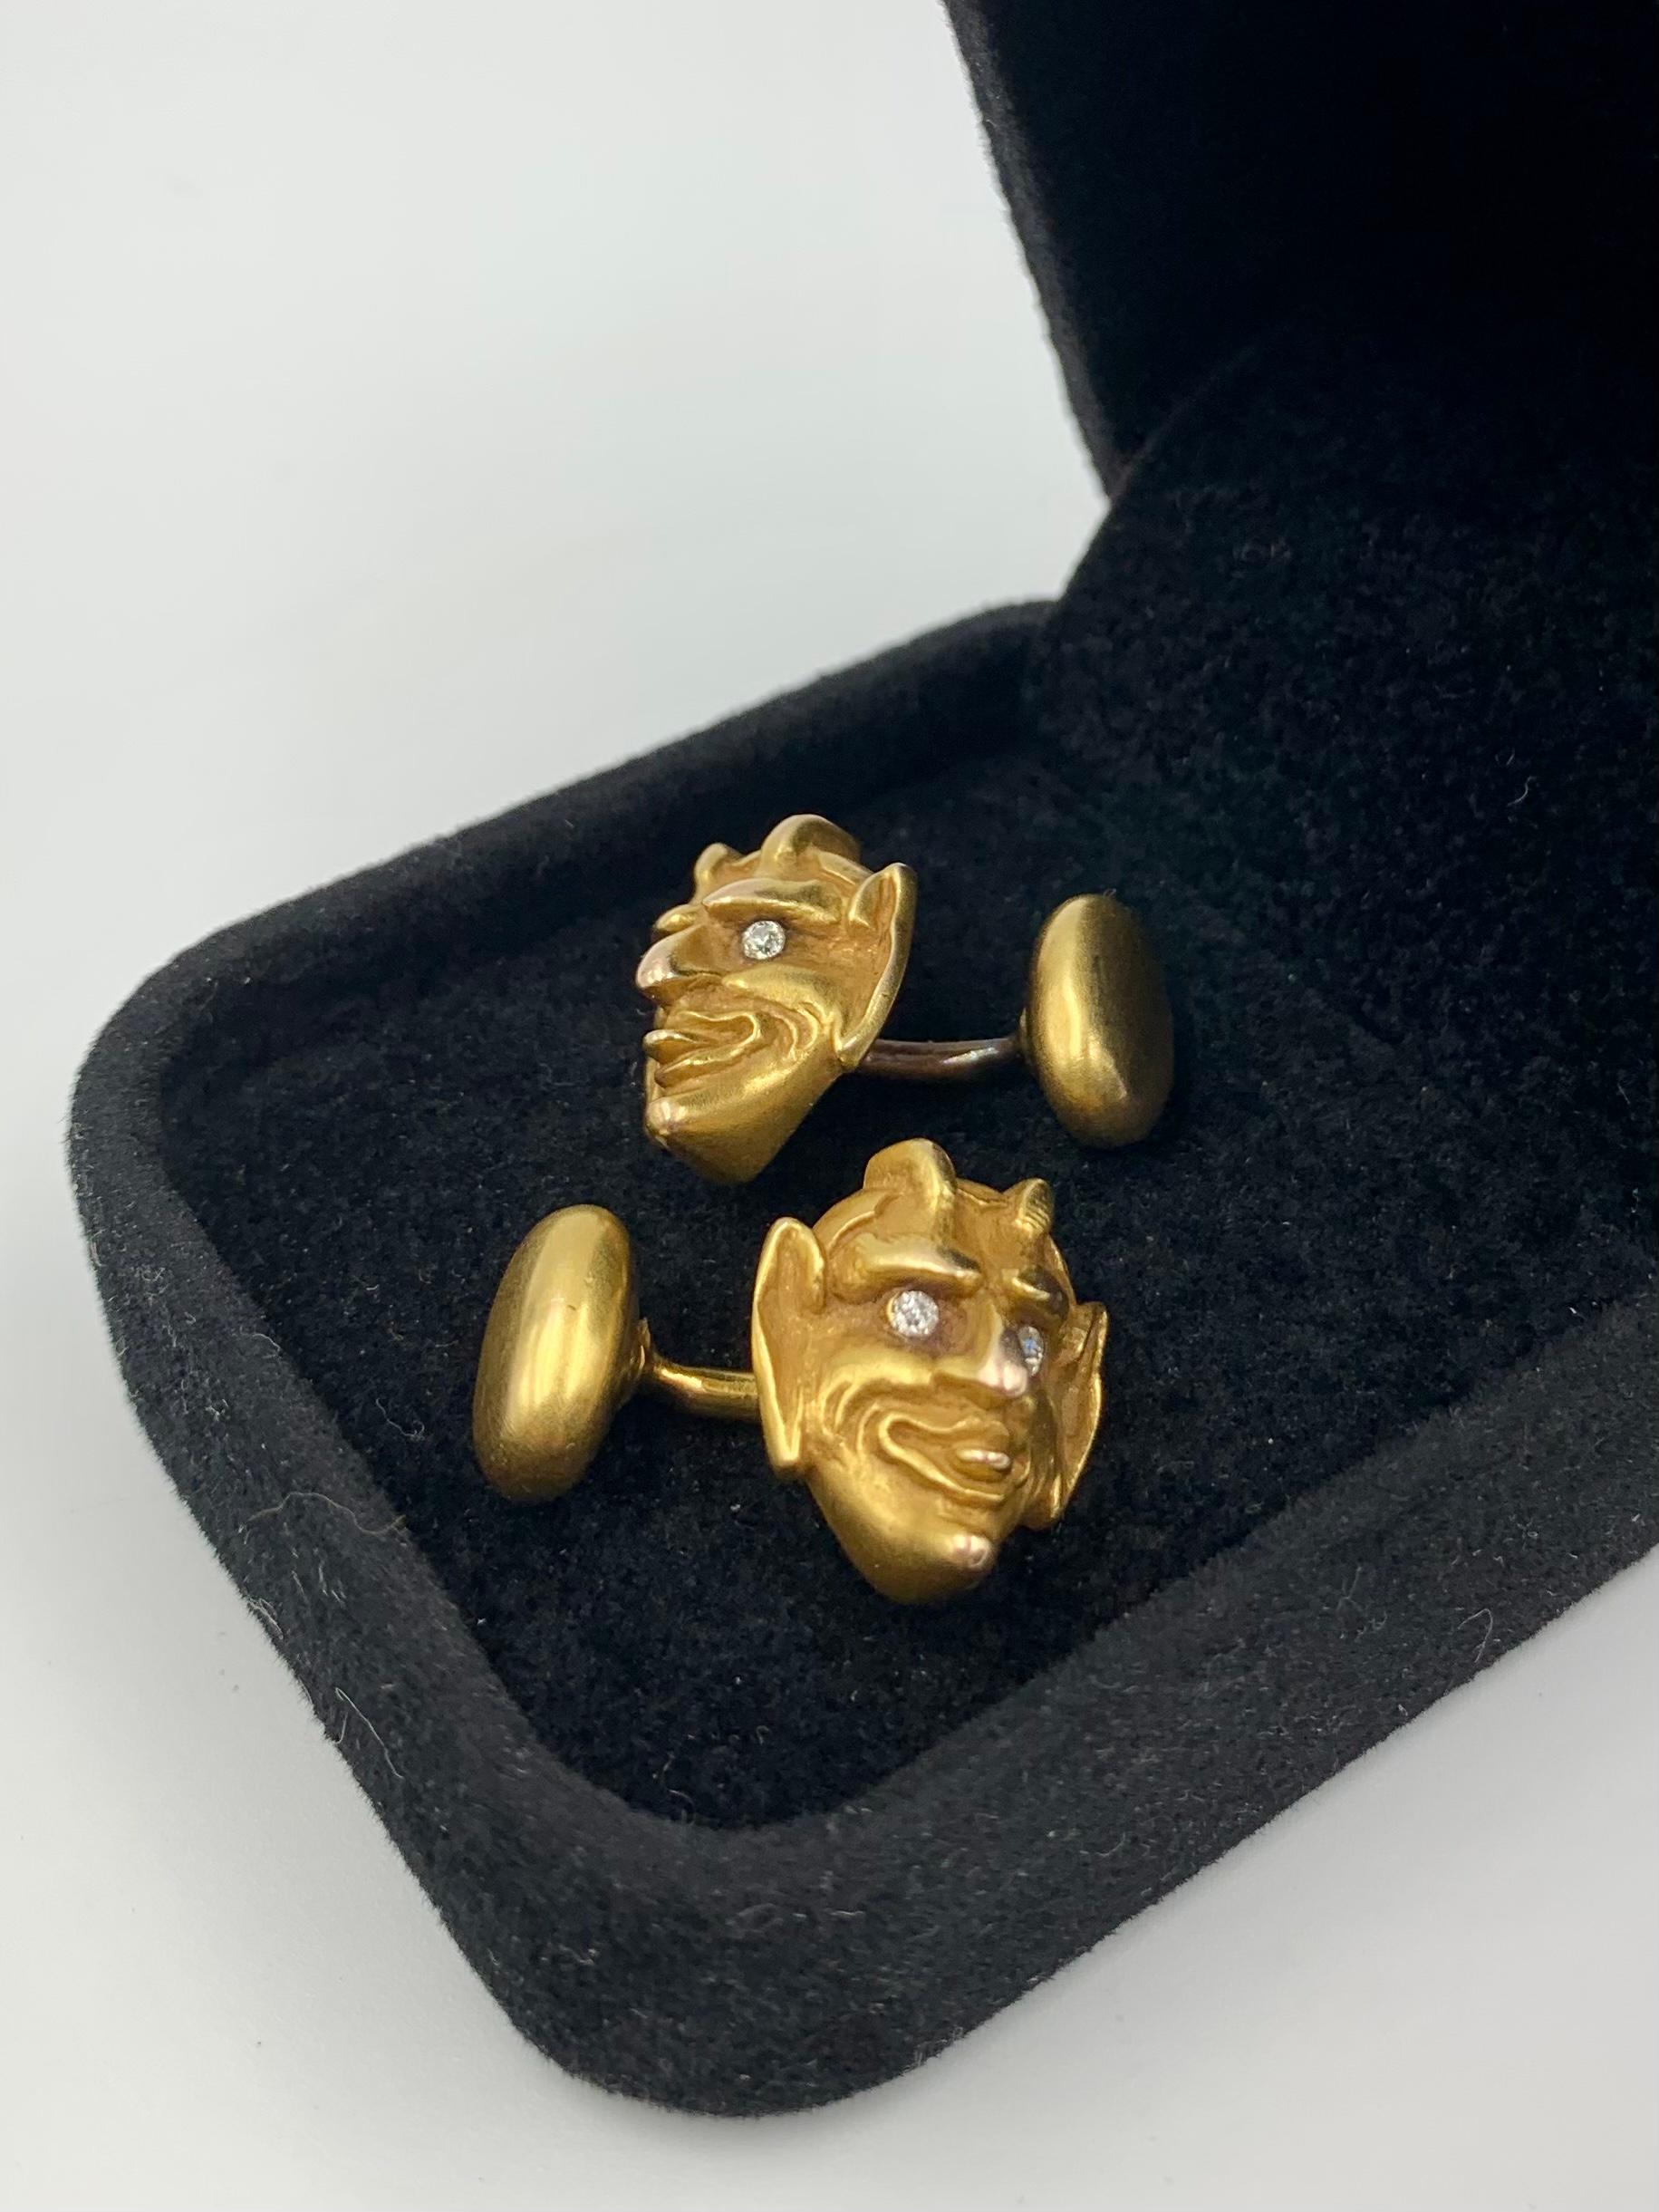 Victorian Period Diamond, 14K yellow gold Mocking Tongue Devil cufflinks
Late 19th Century
Charming, mischevious Diamond Eyed Lucifer naturalistically portrayed sticking his tongue out in a mocking gesture. The gesture traces its history back to